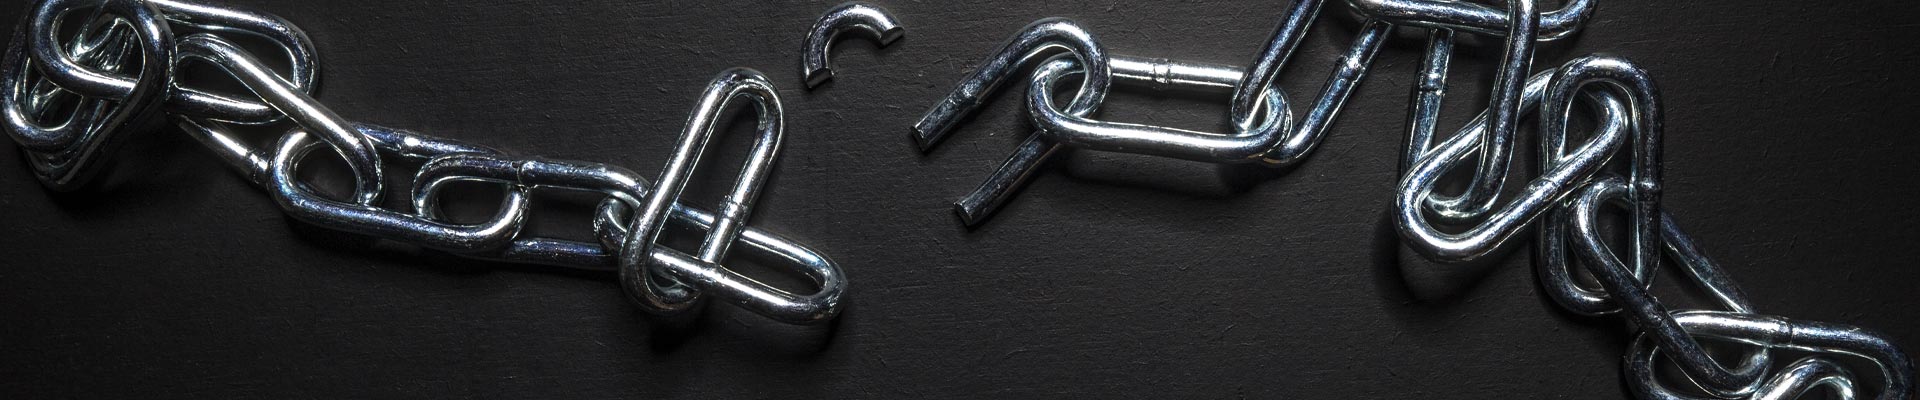 Supply chain management: why you need to close your security gaps